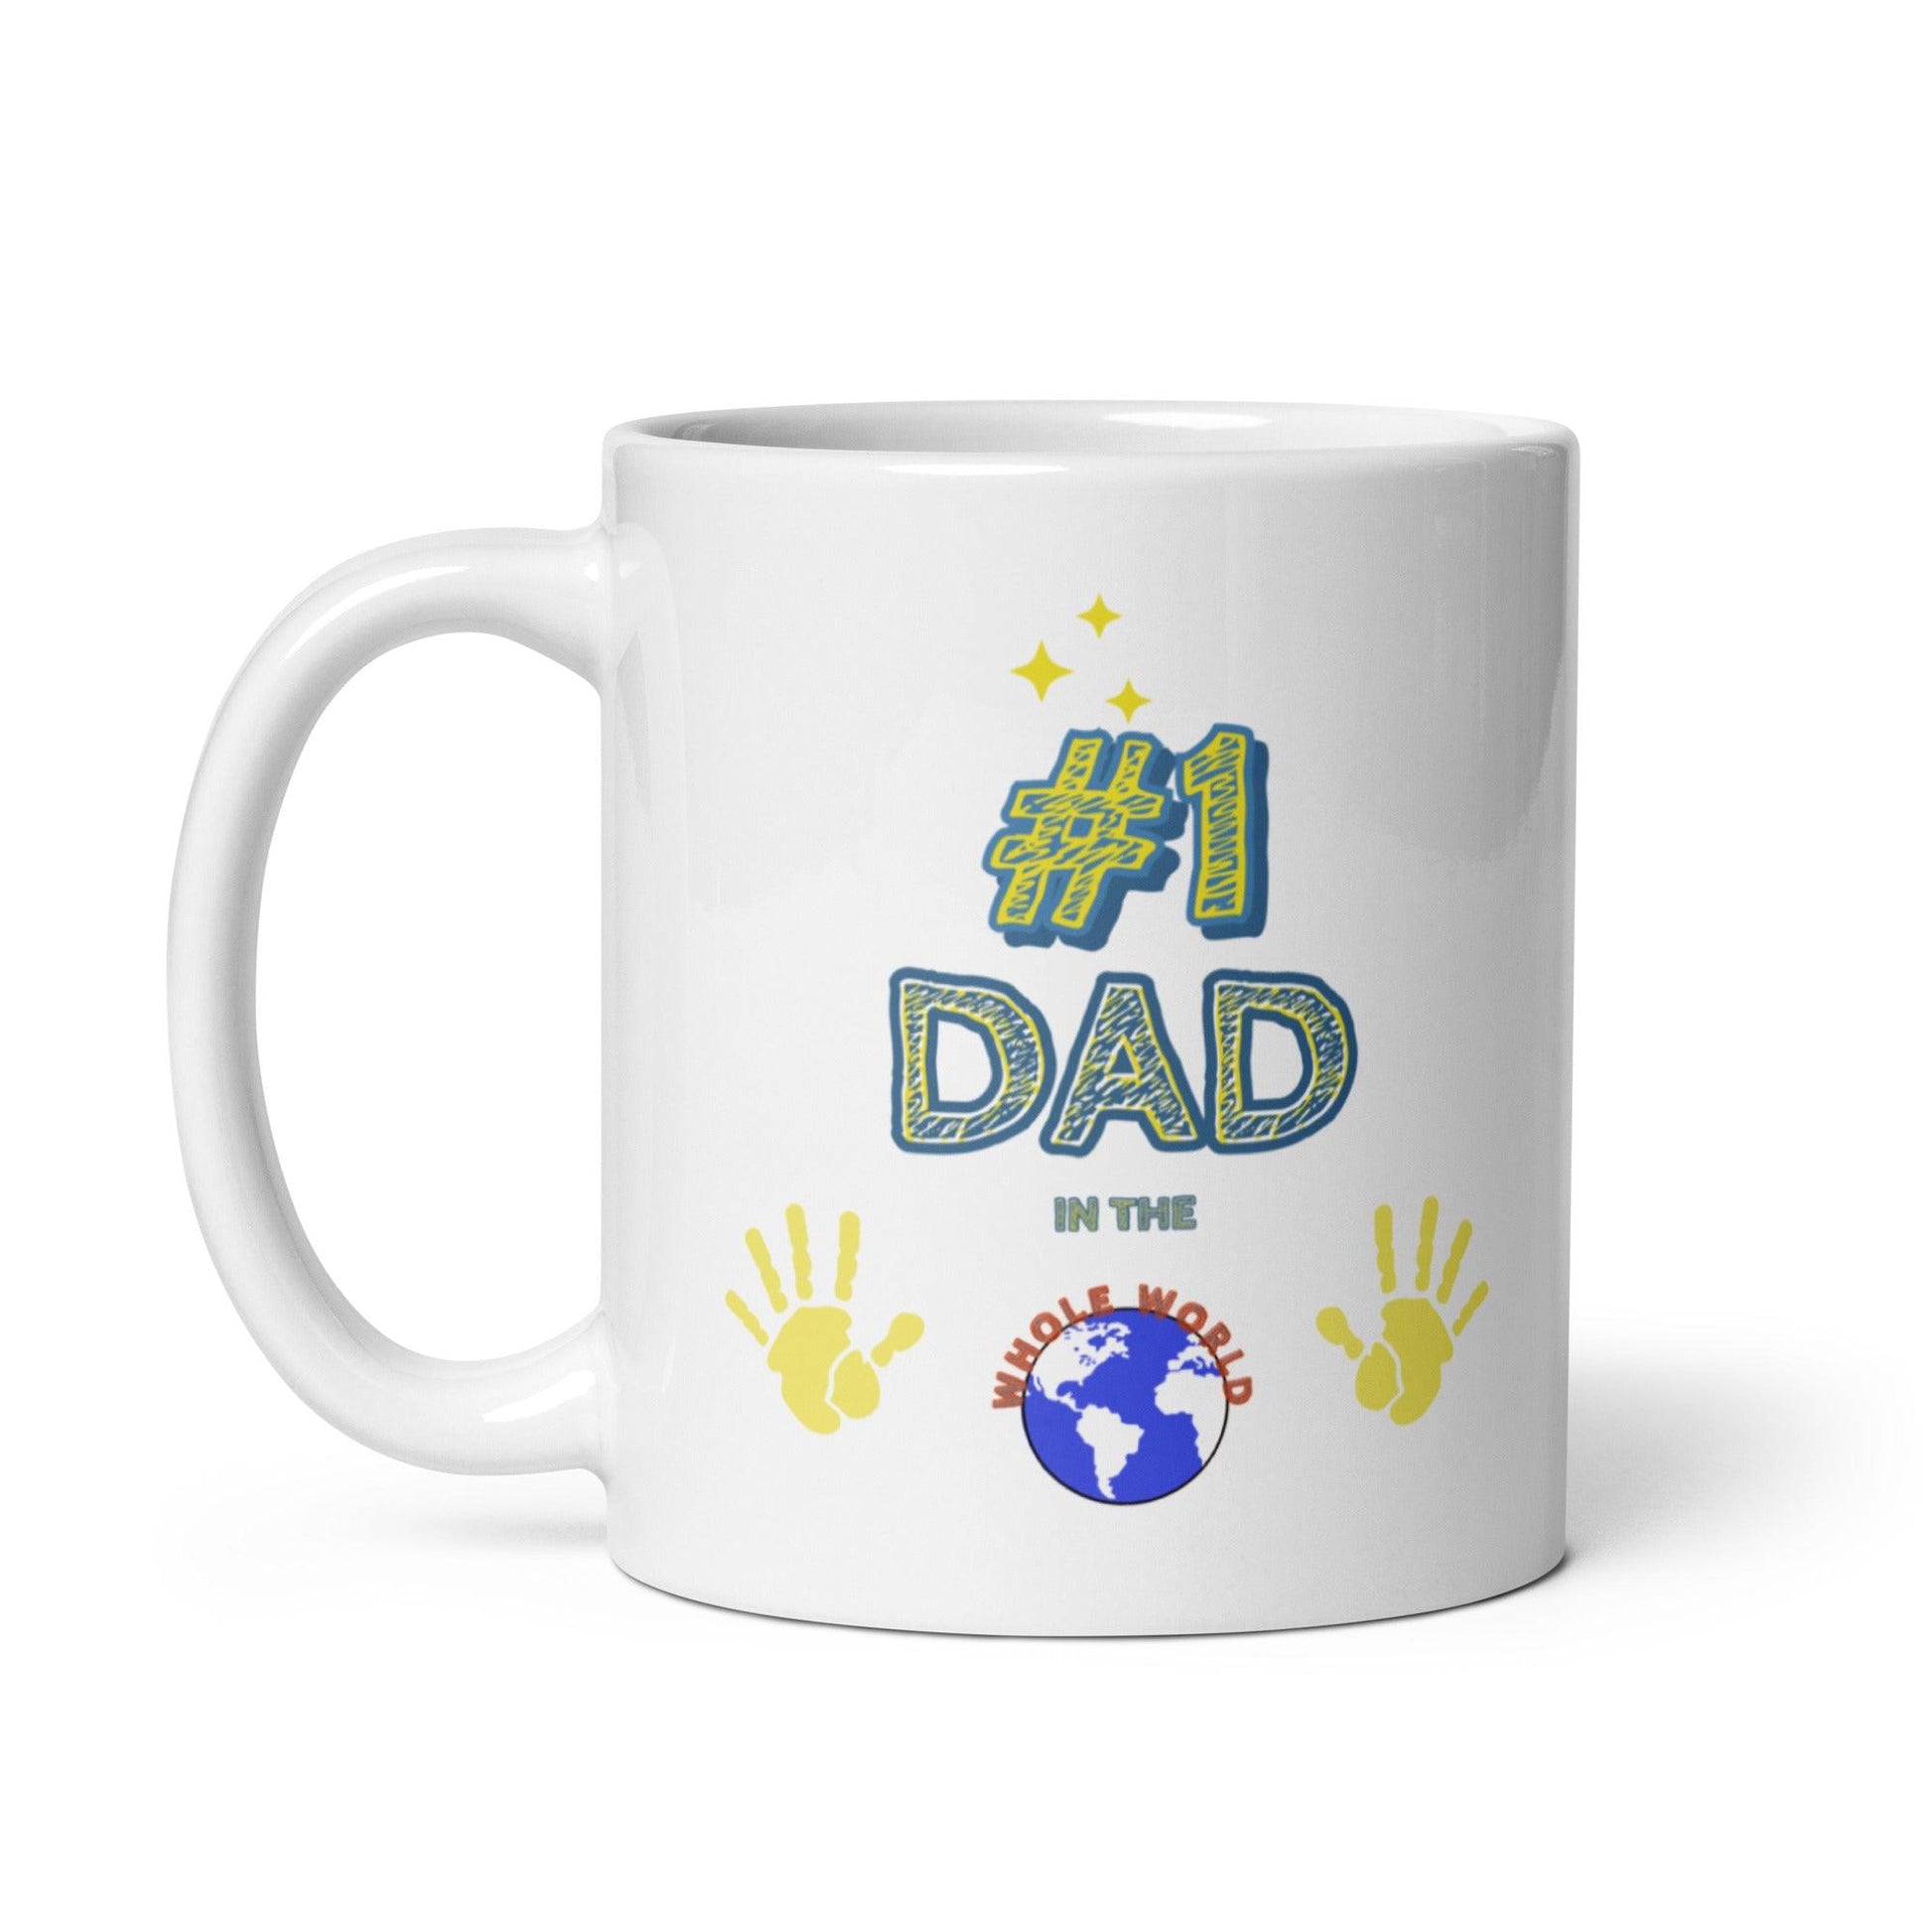 '#1 DAD IN THE WORLD' Glossy Mug Gift - Clover Collection Shop